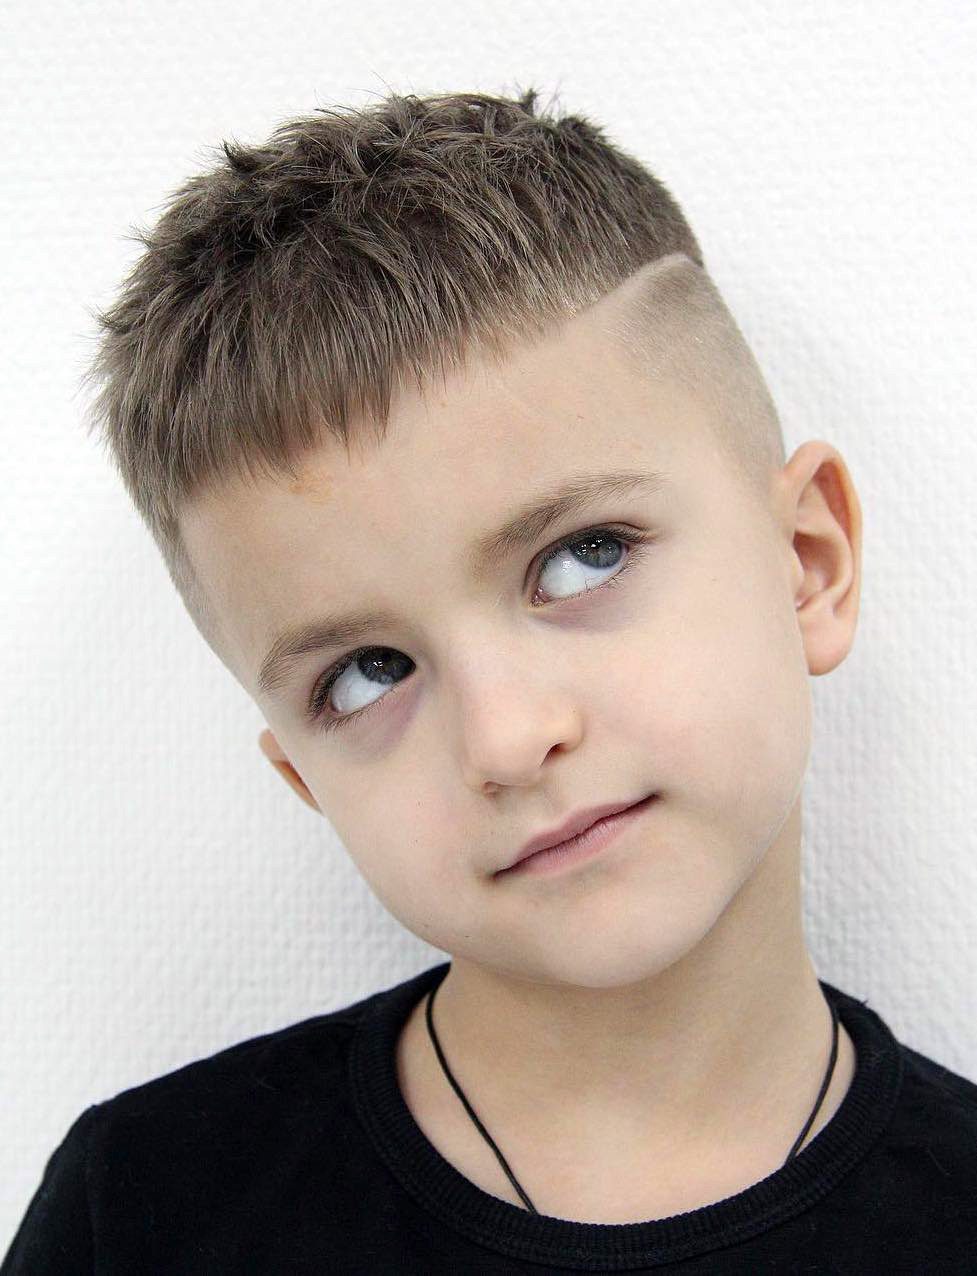 20 of the most popular 10-year-old boy haircuts | haircut